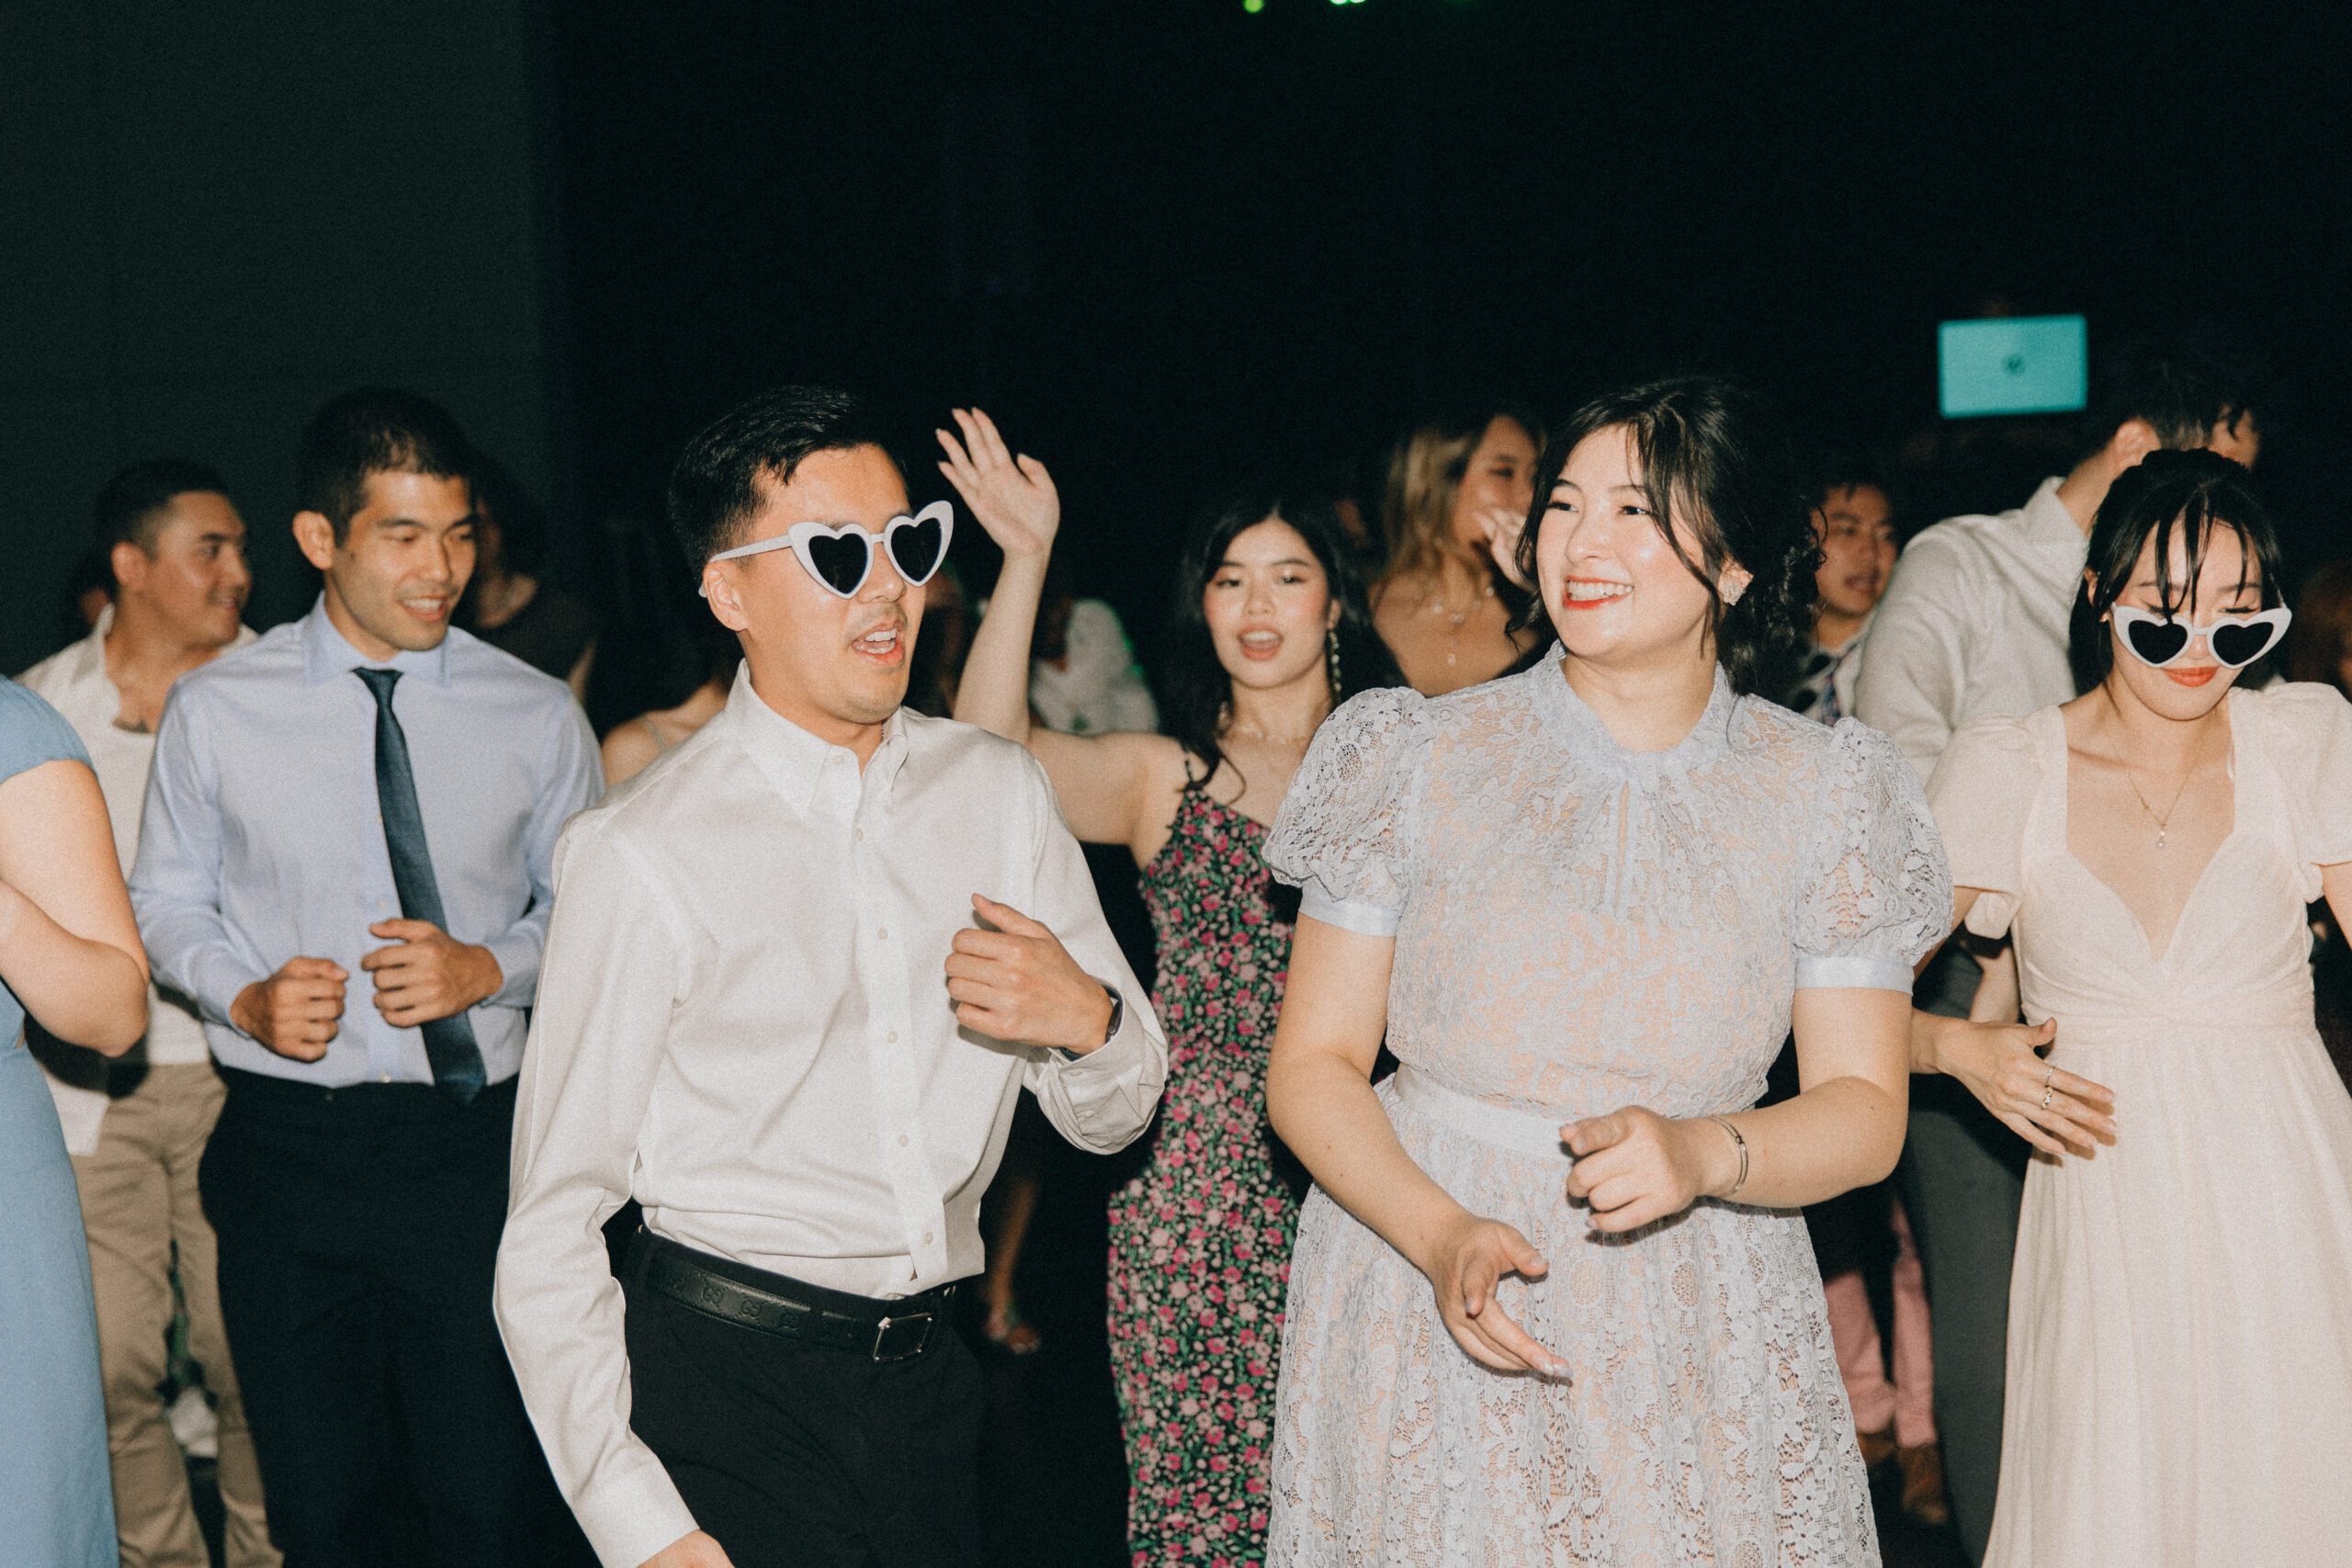 guests on the dance floor at a wedding wearing trendy heart shaped sunglasses